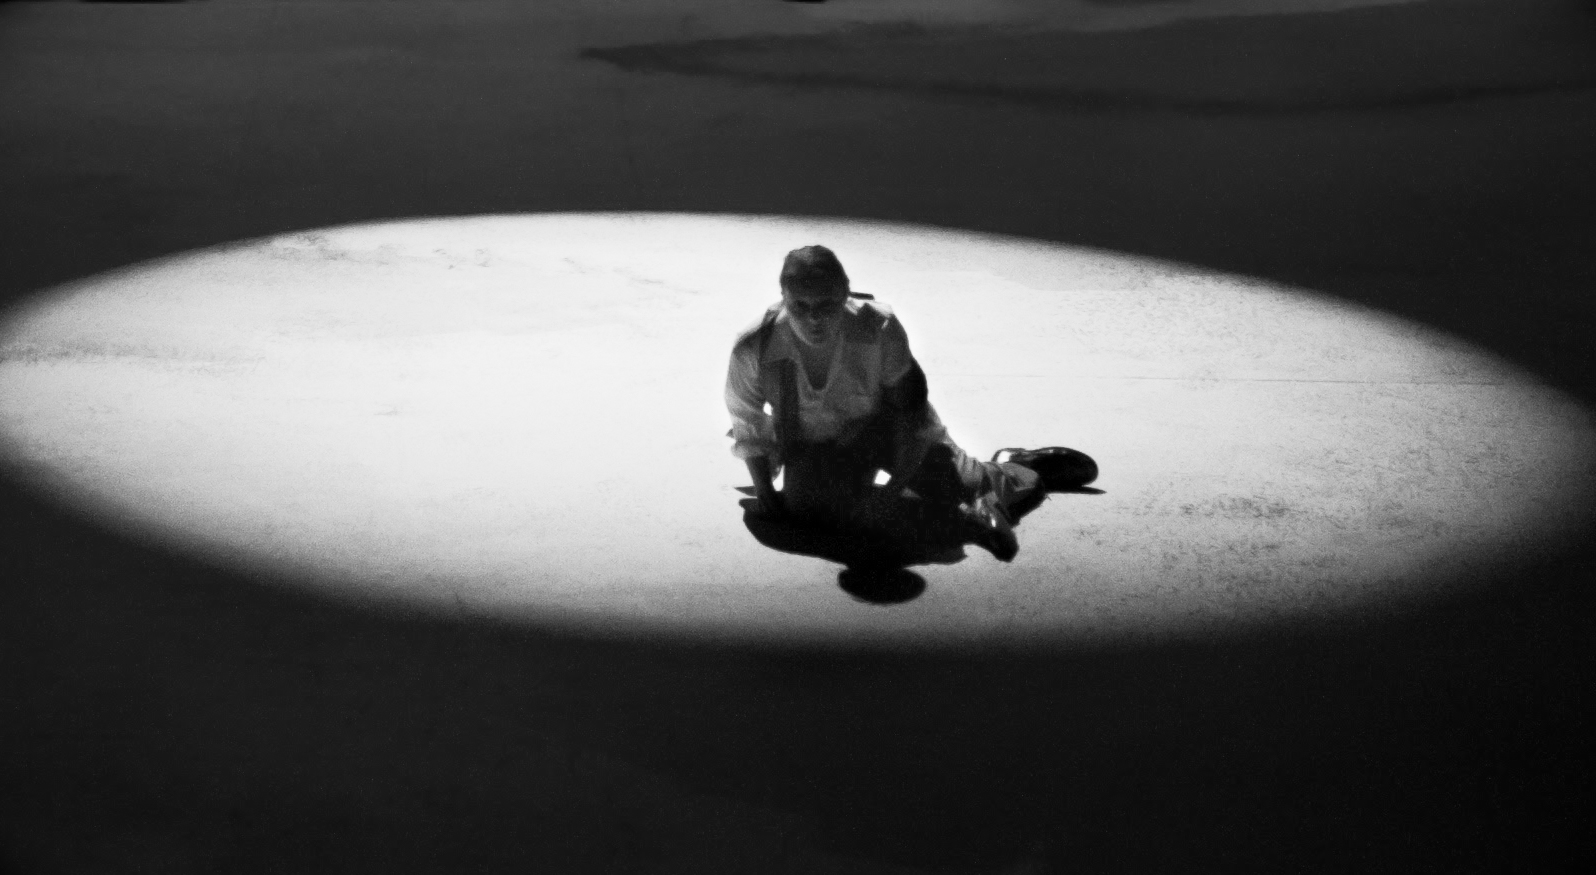 S.T. is shown as a well-dressed young man crumpled in a spotlight on the floor.  He looks disheveled.